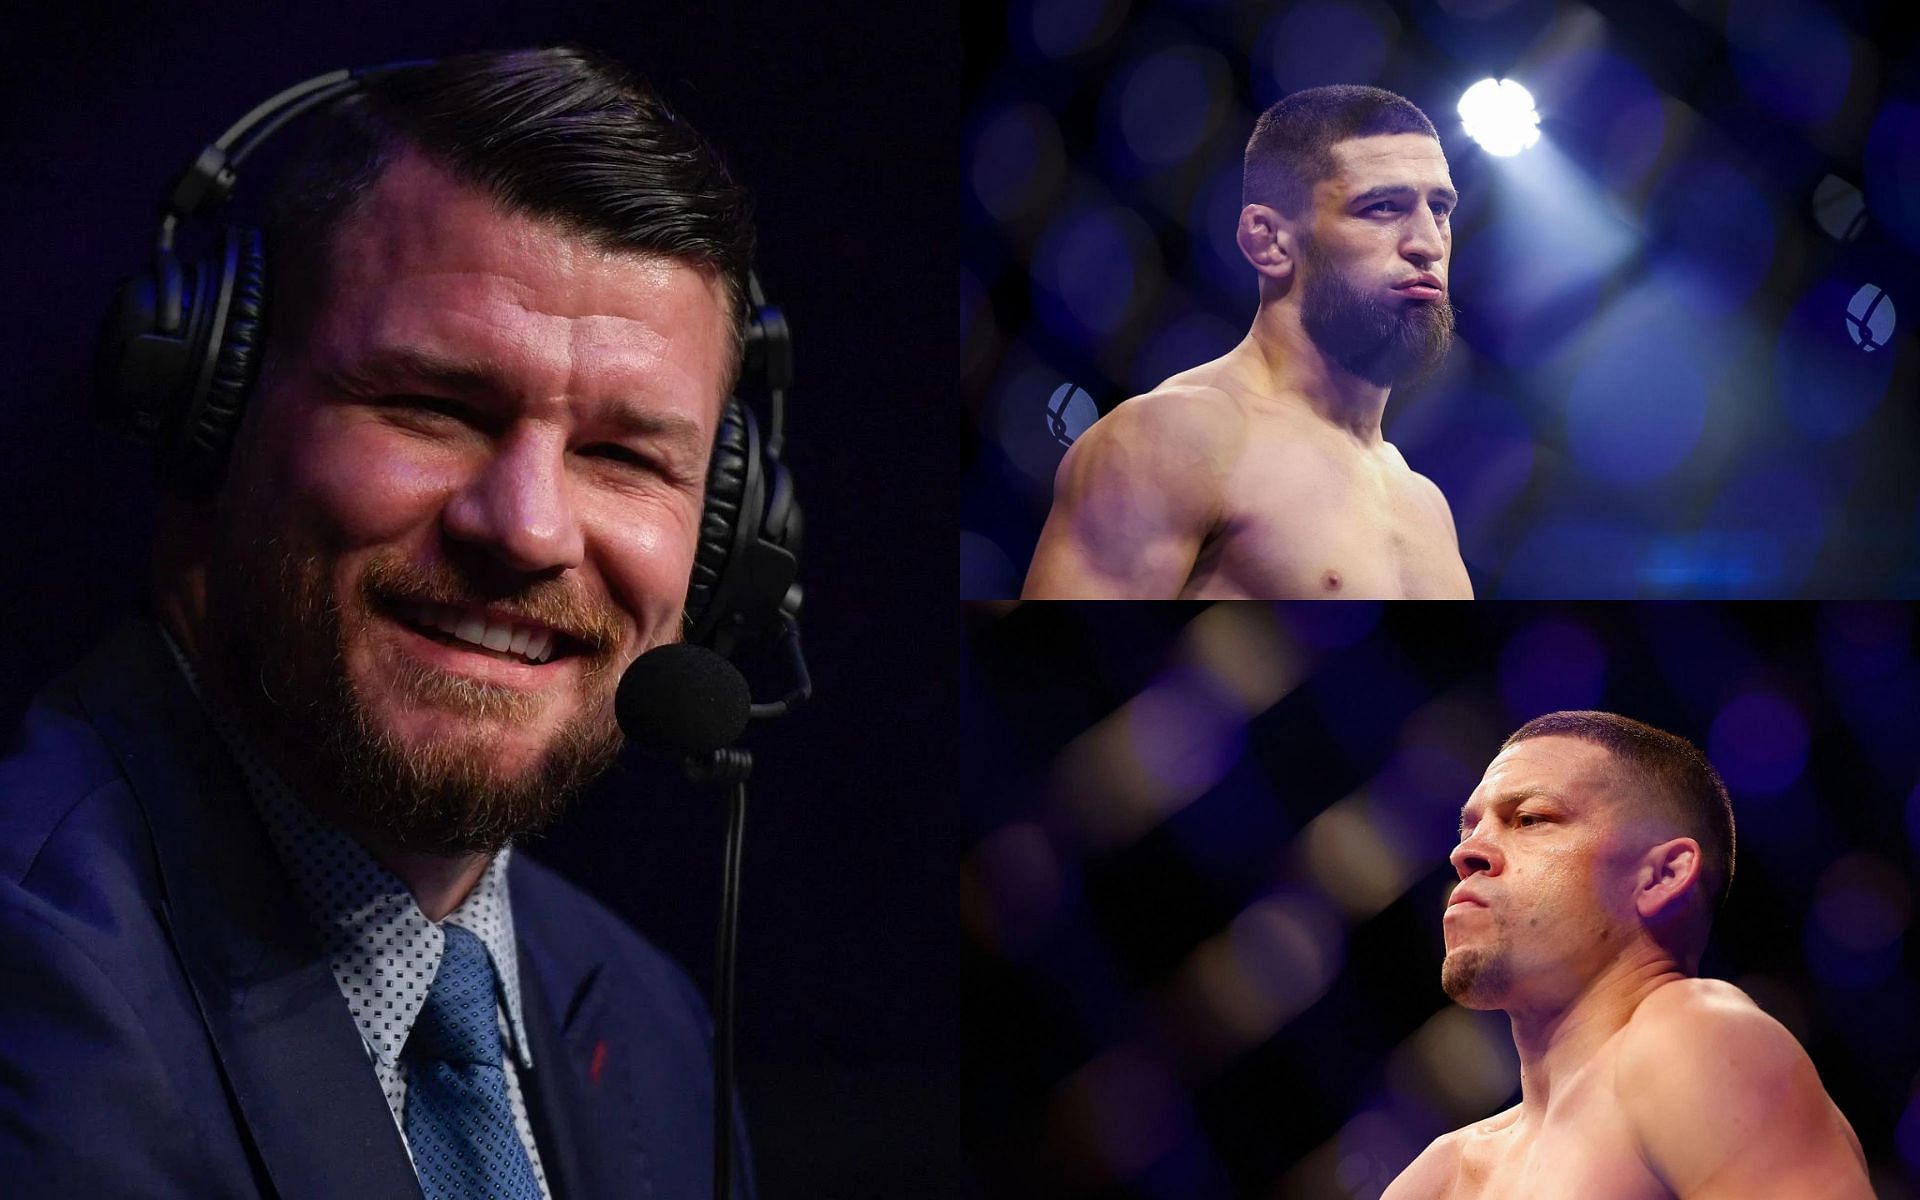 Michael Bisping (left), Khamzat Chimaev (top right), Nate Diaz (bottom right) [Images courtesy of Getty]